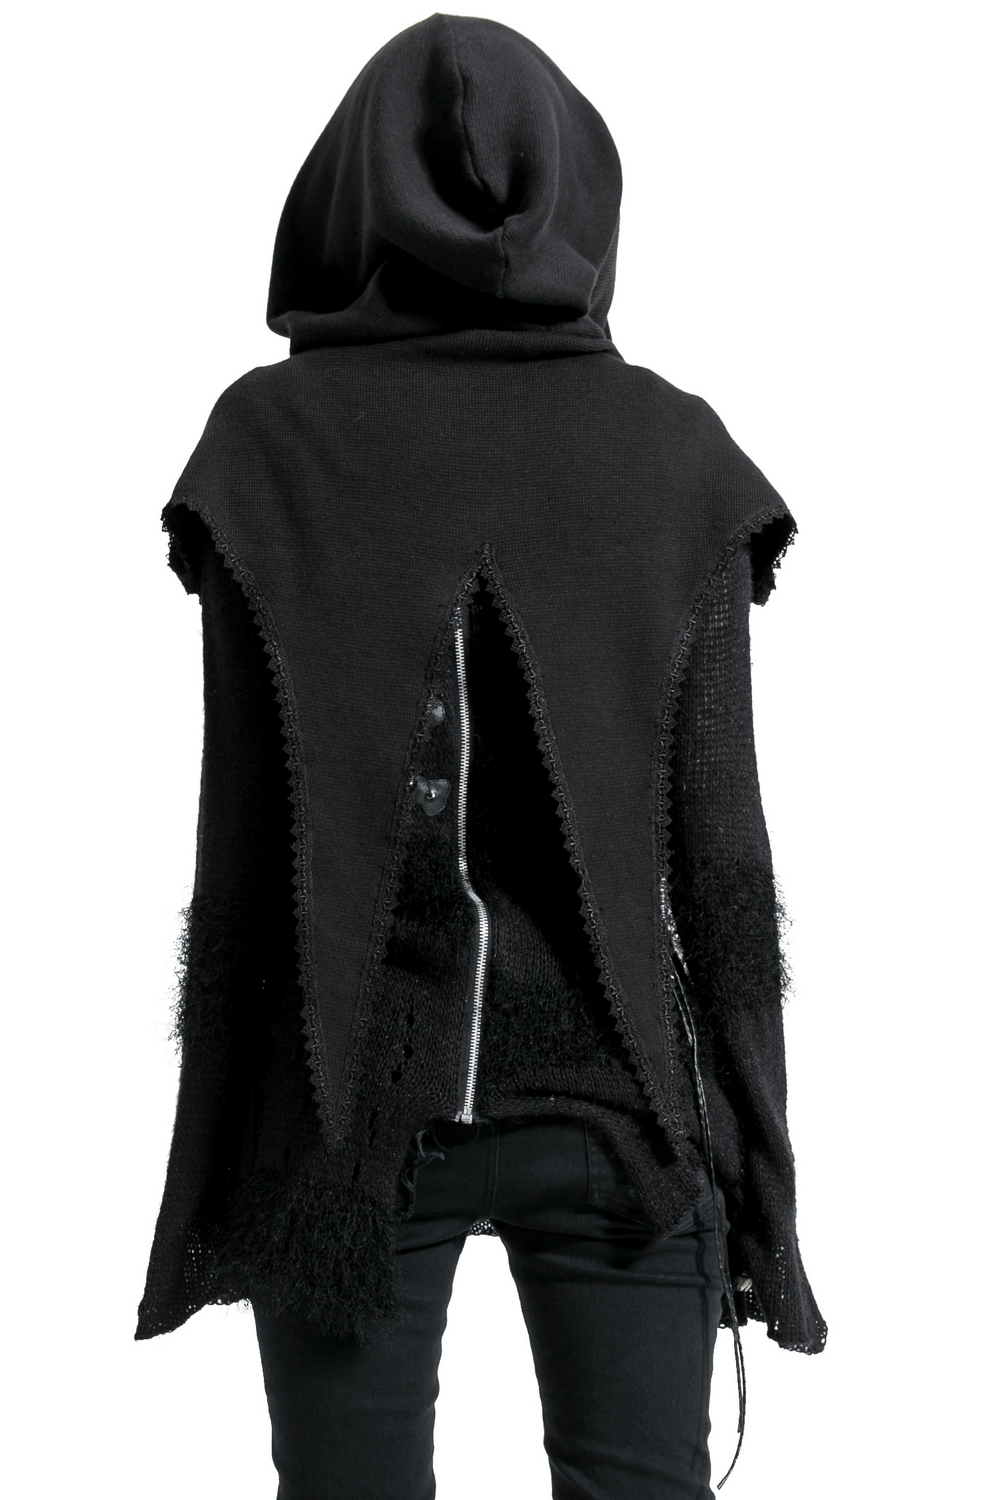 Stylish Gothic Wool Hooded Wrap Cape for Women